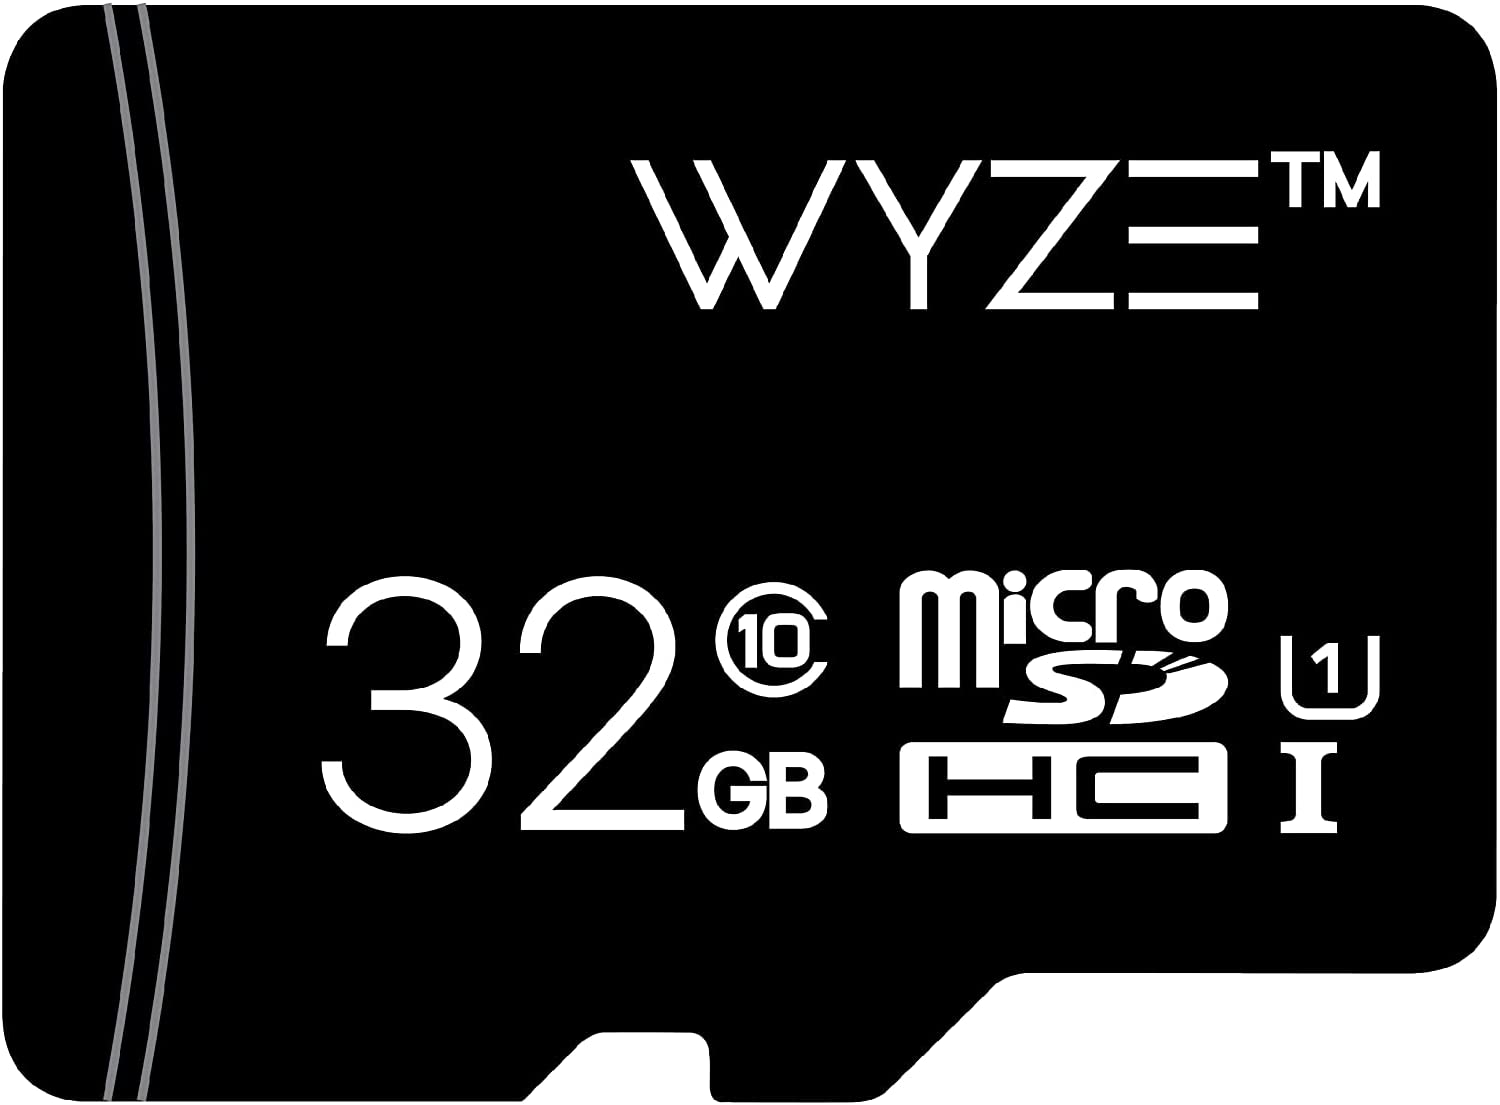 Best Micro SD Card for Wyze Cam